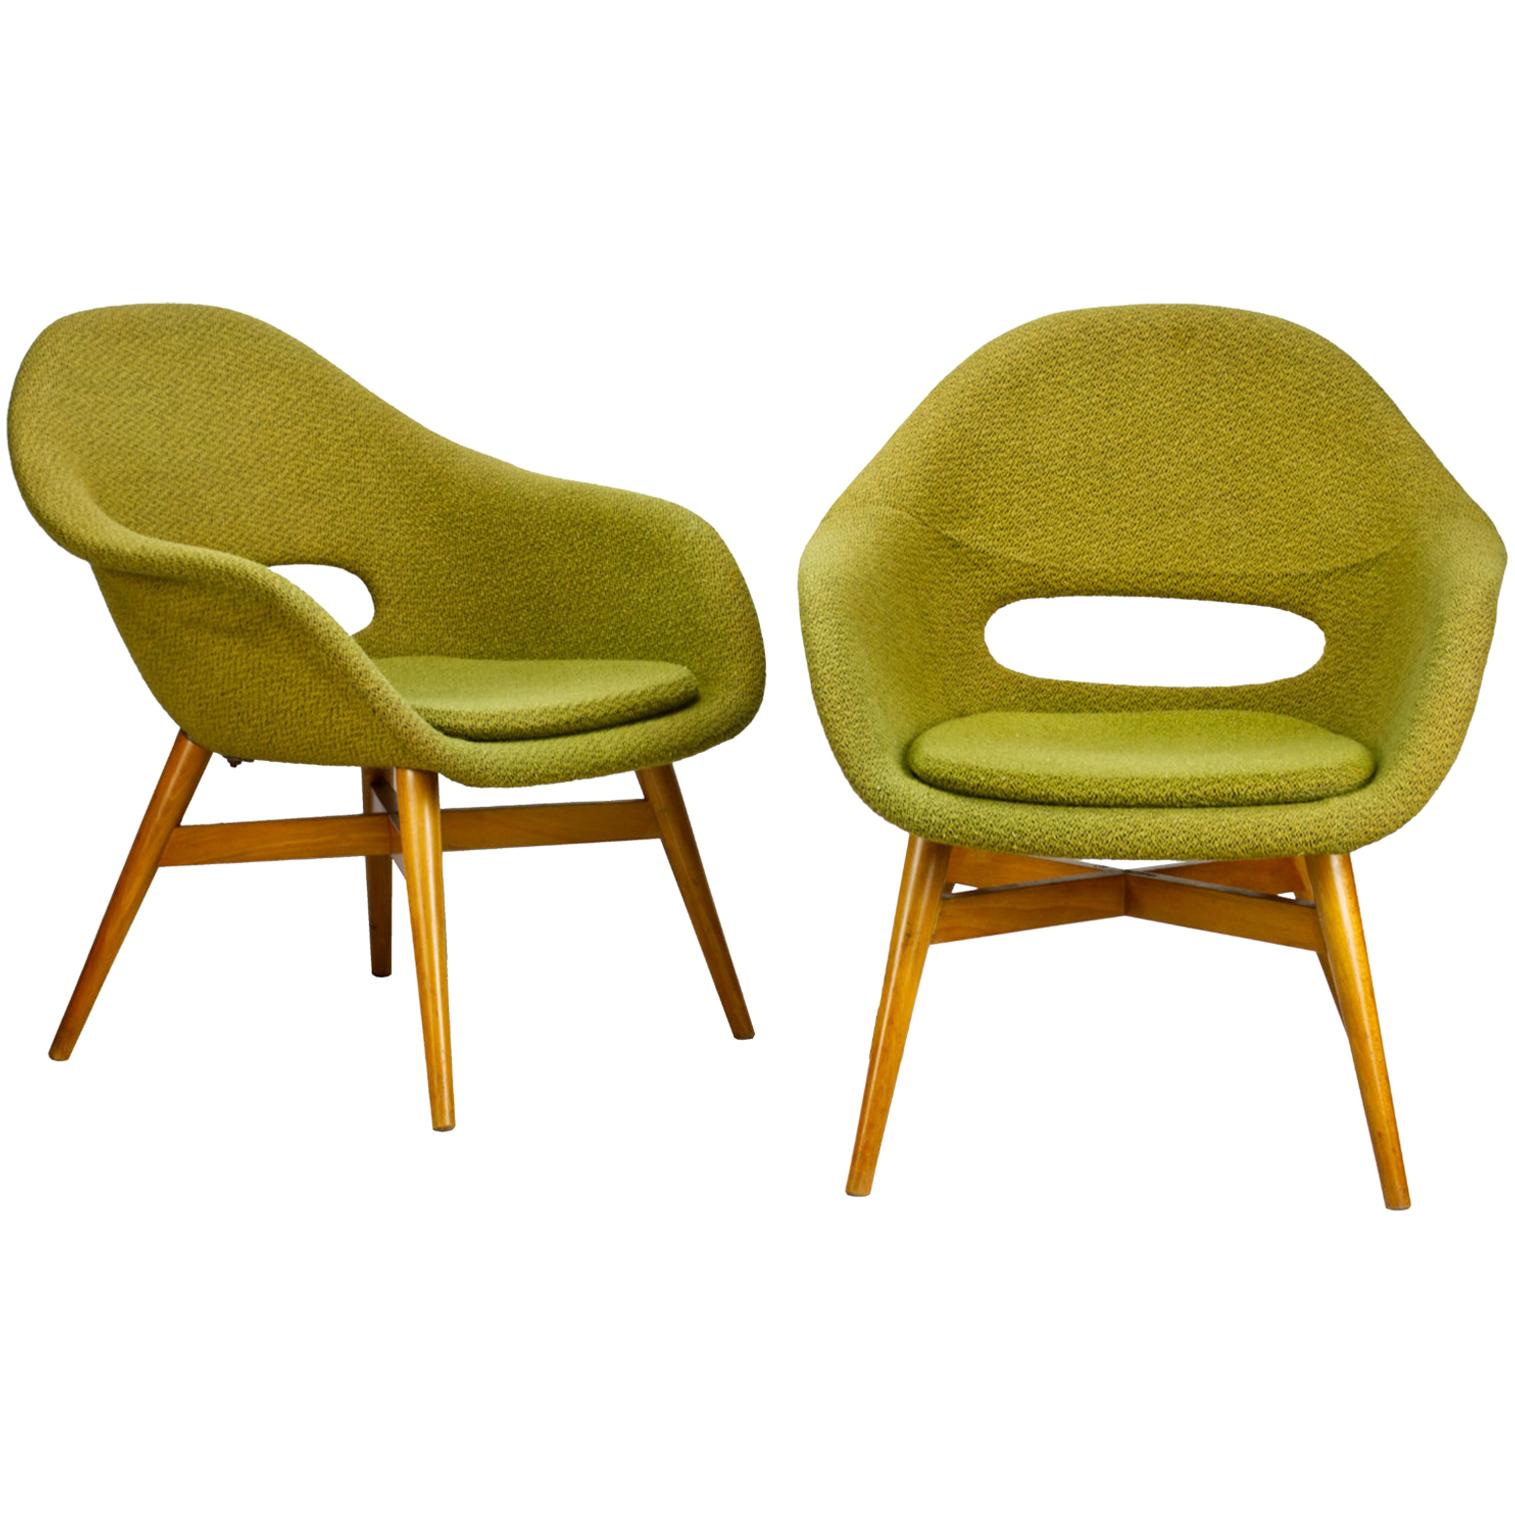 Set of Two Mid Century Easy Chairs by Miroslav Navratil, circa 1960